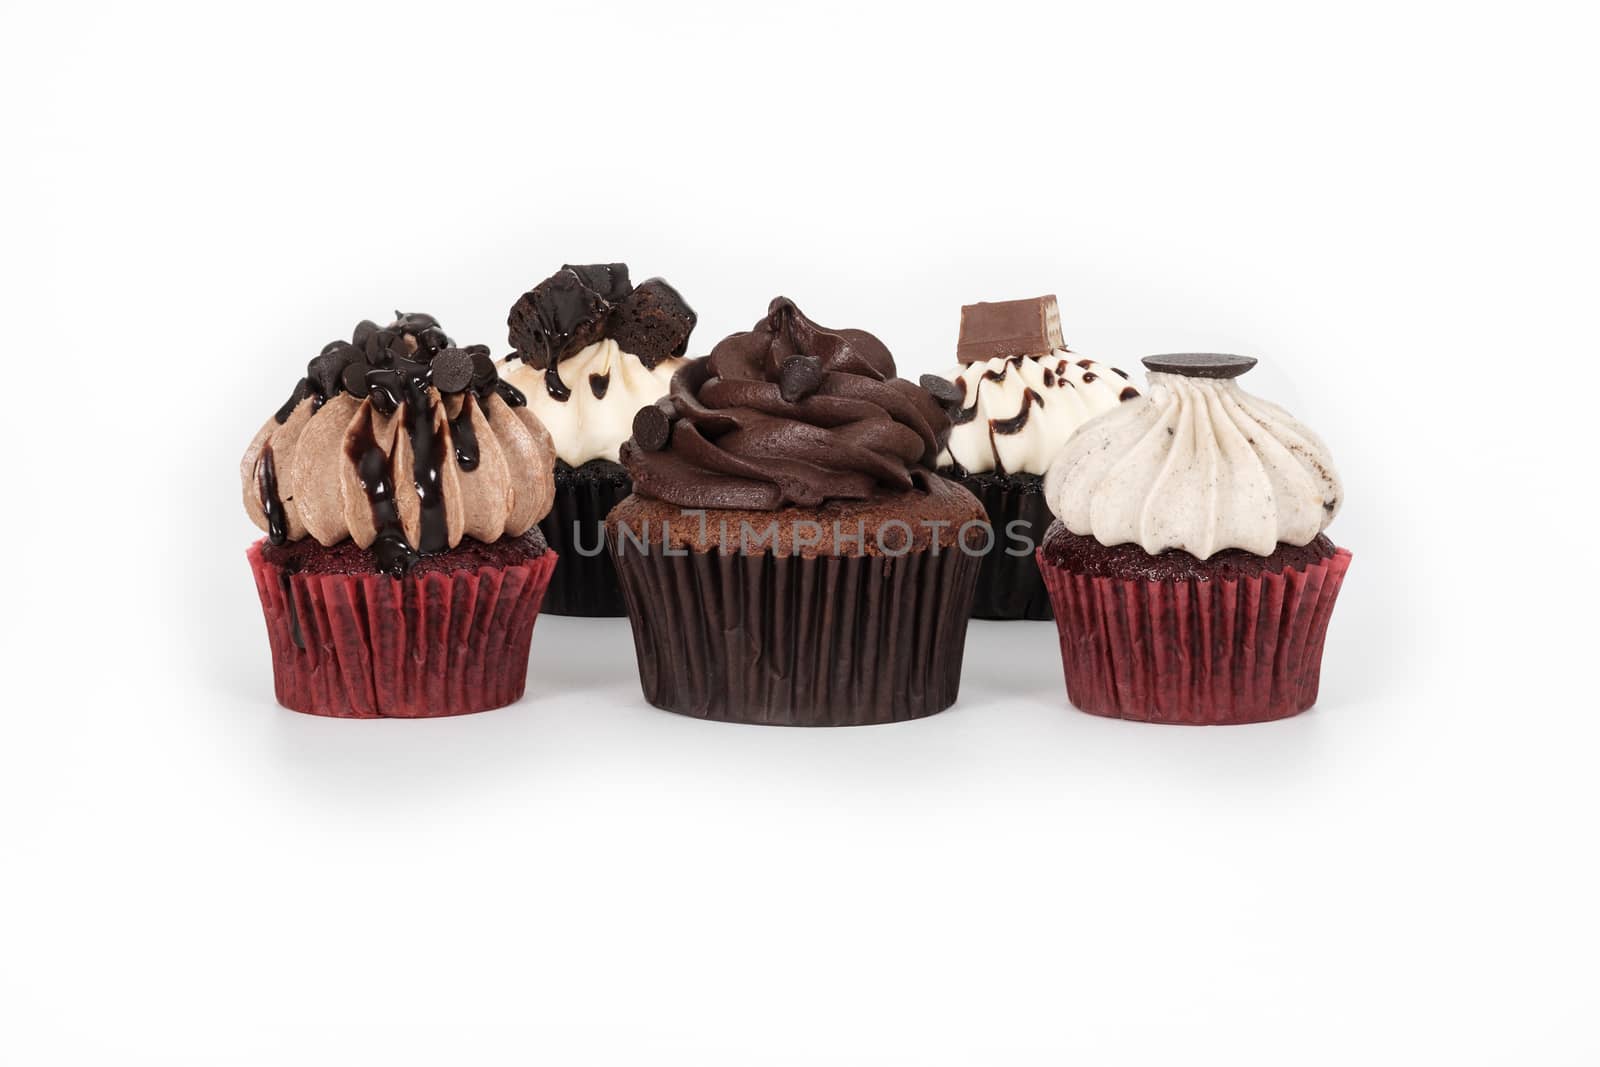 Chocolate cupcake with sprinkles isolated on white background.